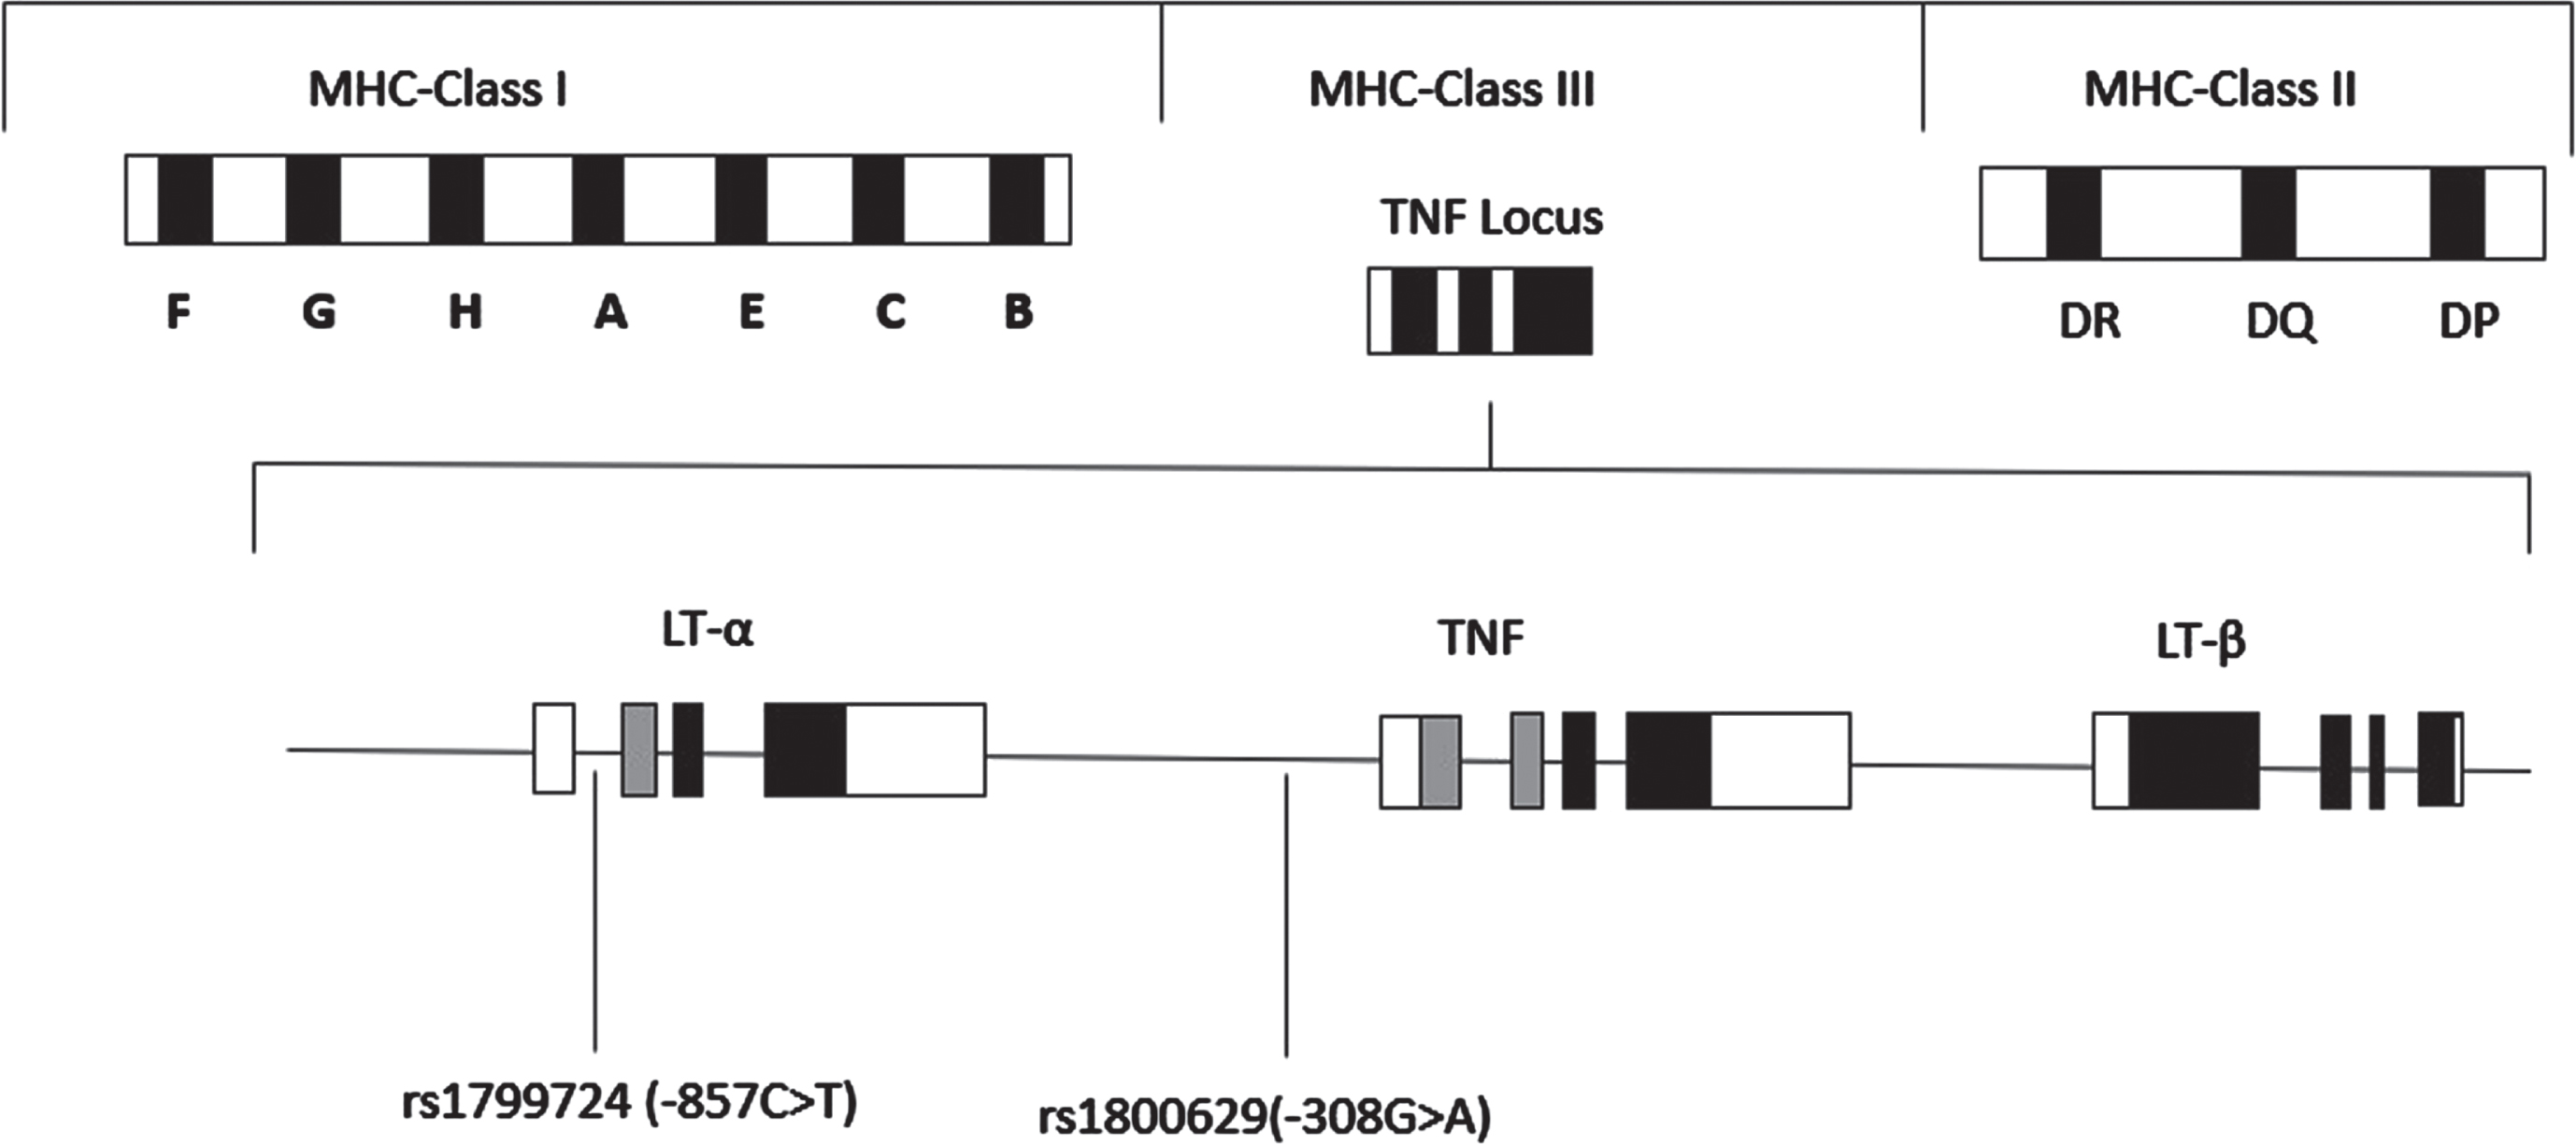 Schematic representation of the location of the TNF genes within the Major Histocompatibility Complex (MHC) on chromosome 6. TNF includes lymphotoxin-α (LT-α), tumor necrosis factor (TNF-α), and lymphotoxin-β (LT-β). The positions of the two SNPs, rs1799724 (-857 C>T), and rs1800629 (-308 G>A) in the TNF-α gene are indicated.